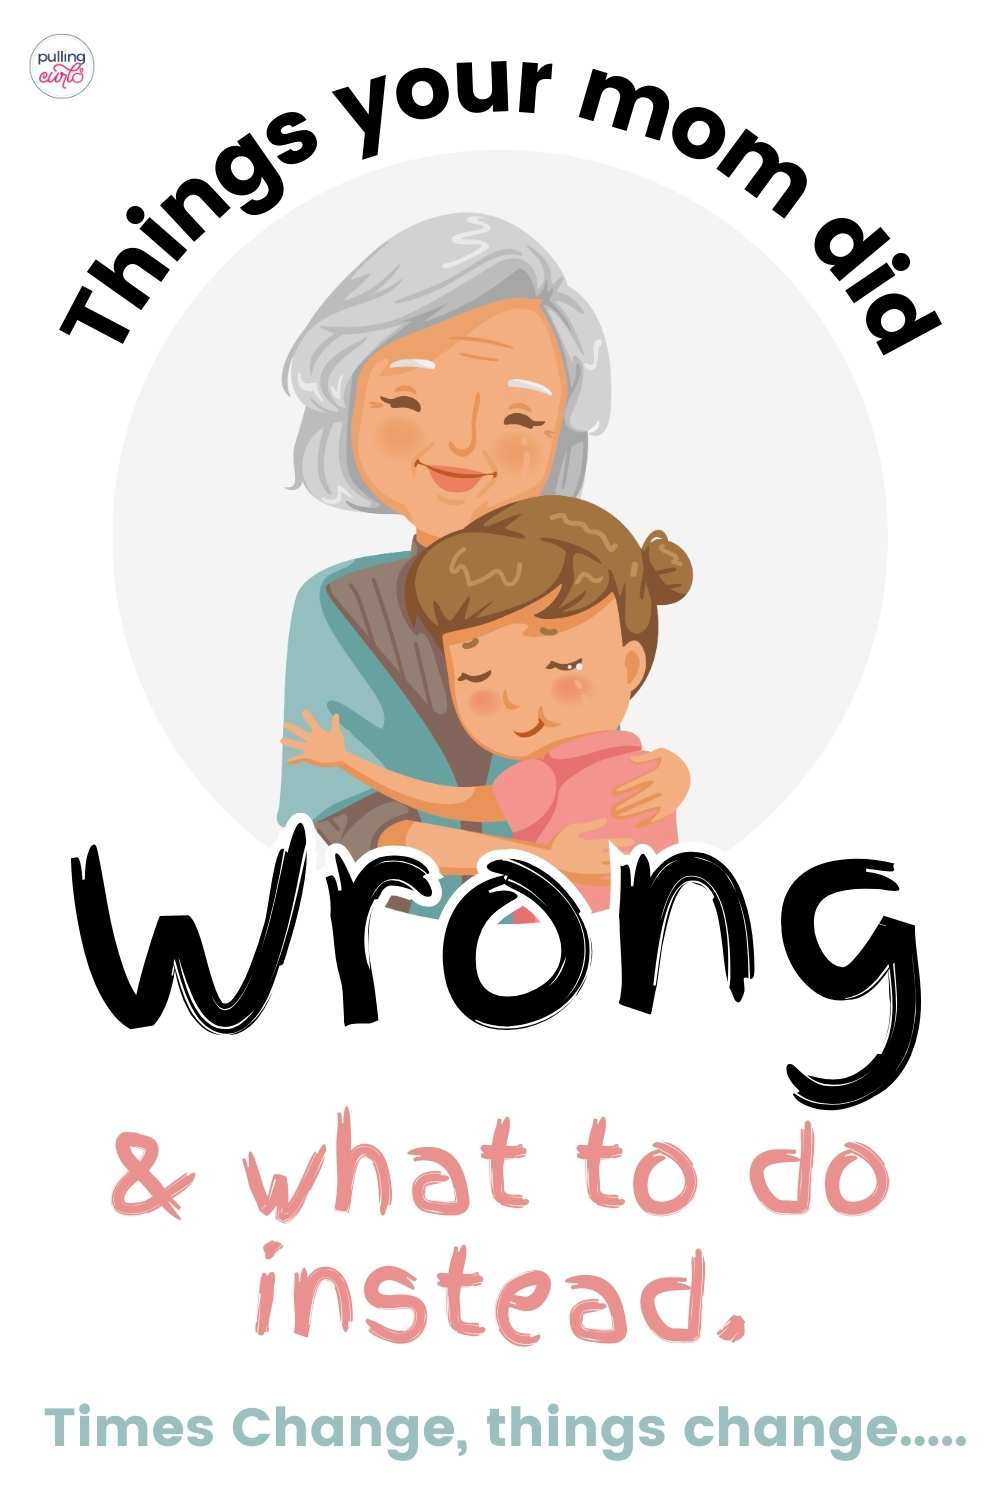 Your mom might do things different with a newborn in the wrong way. via @pullingcurls